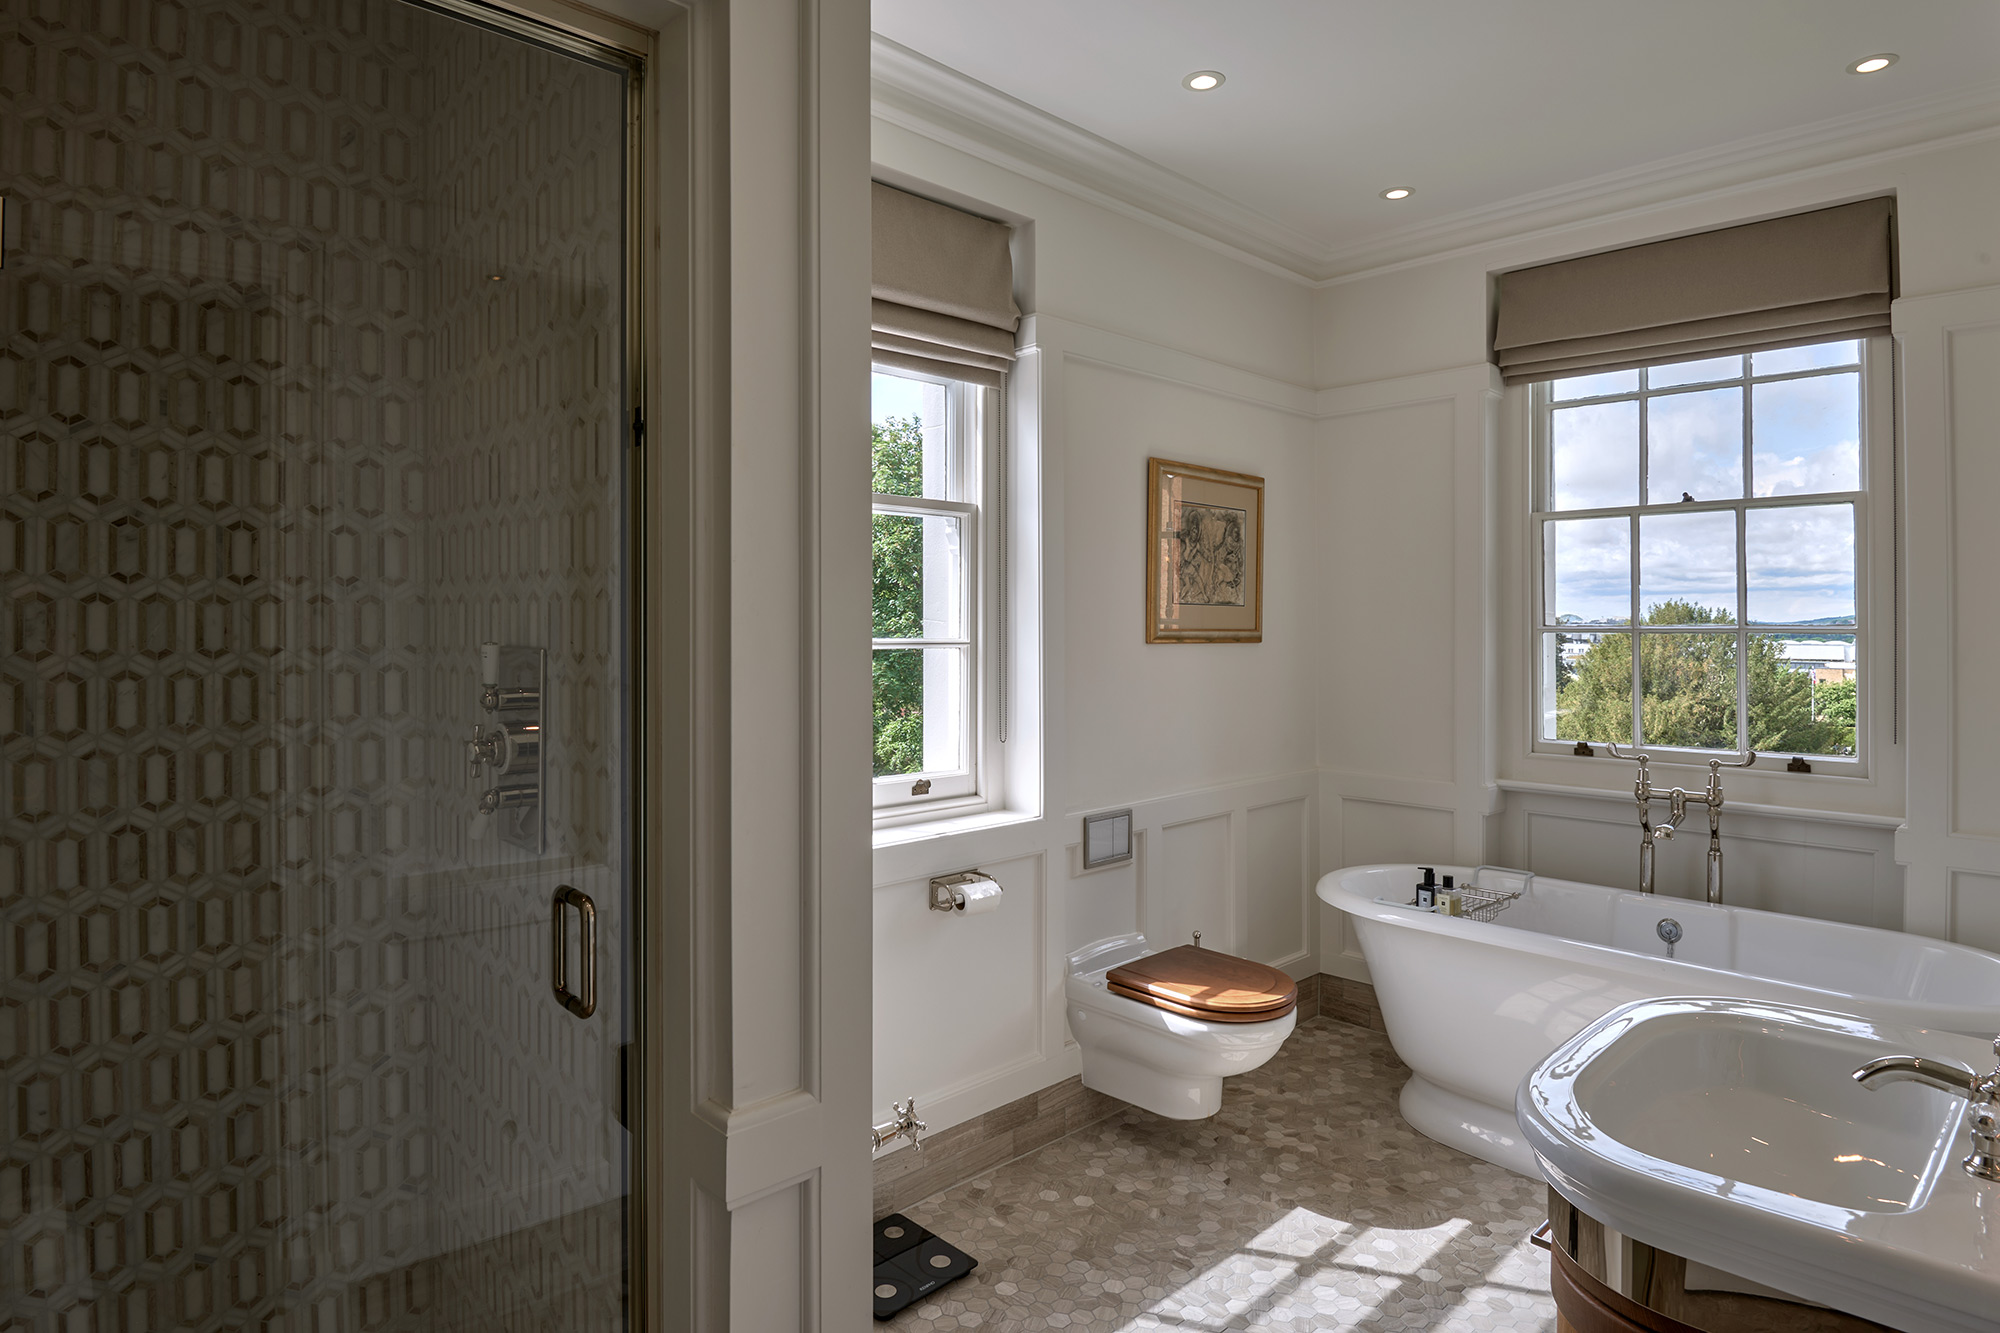 Interior bathroom - Georgian renovation and extension by KM Grant Guildford, Surrey